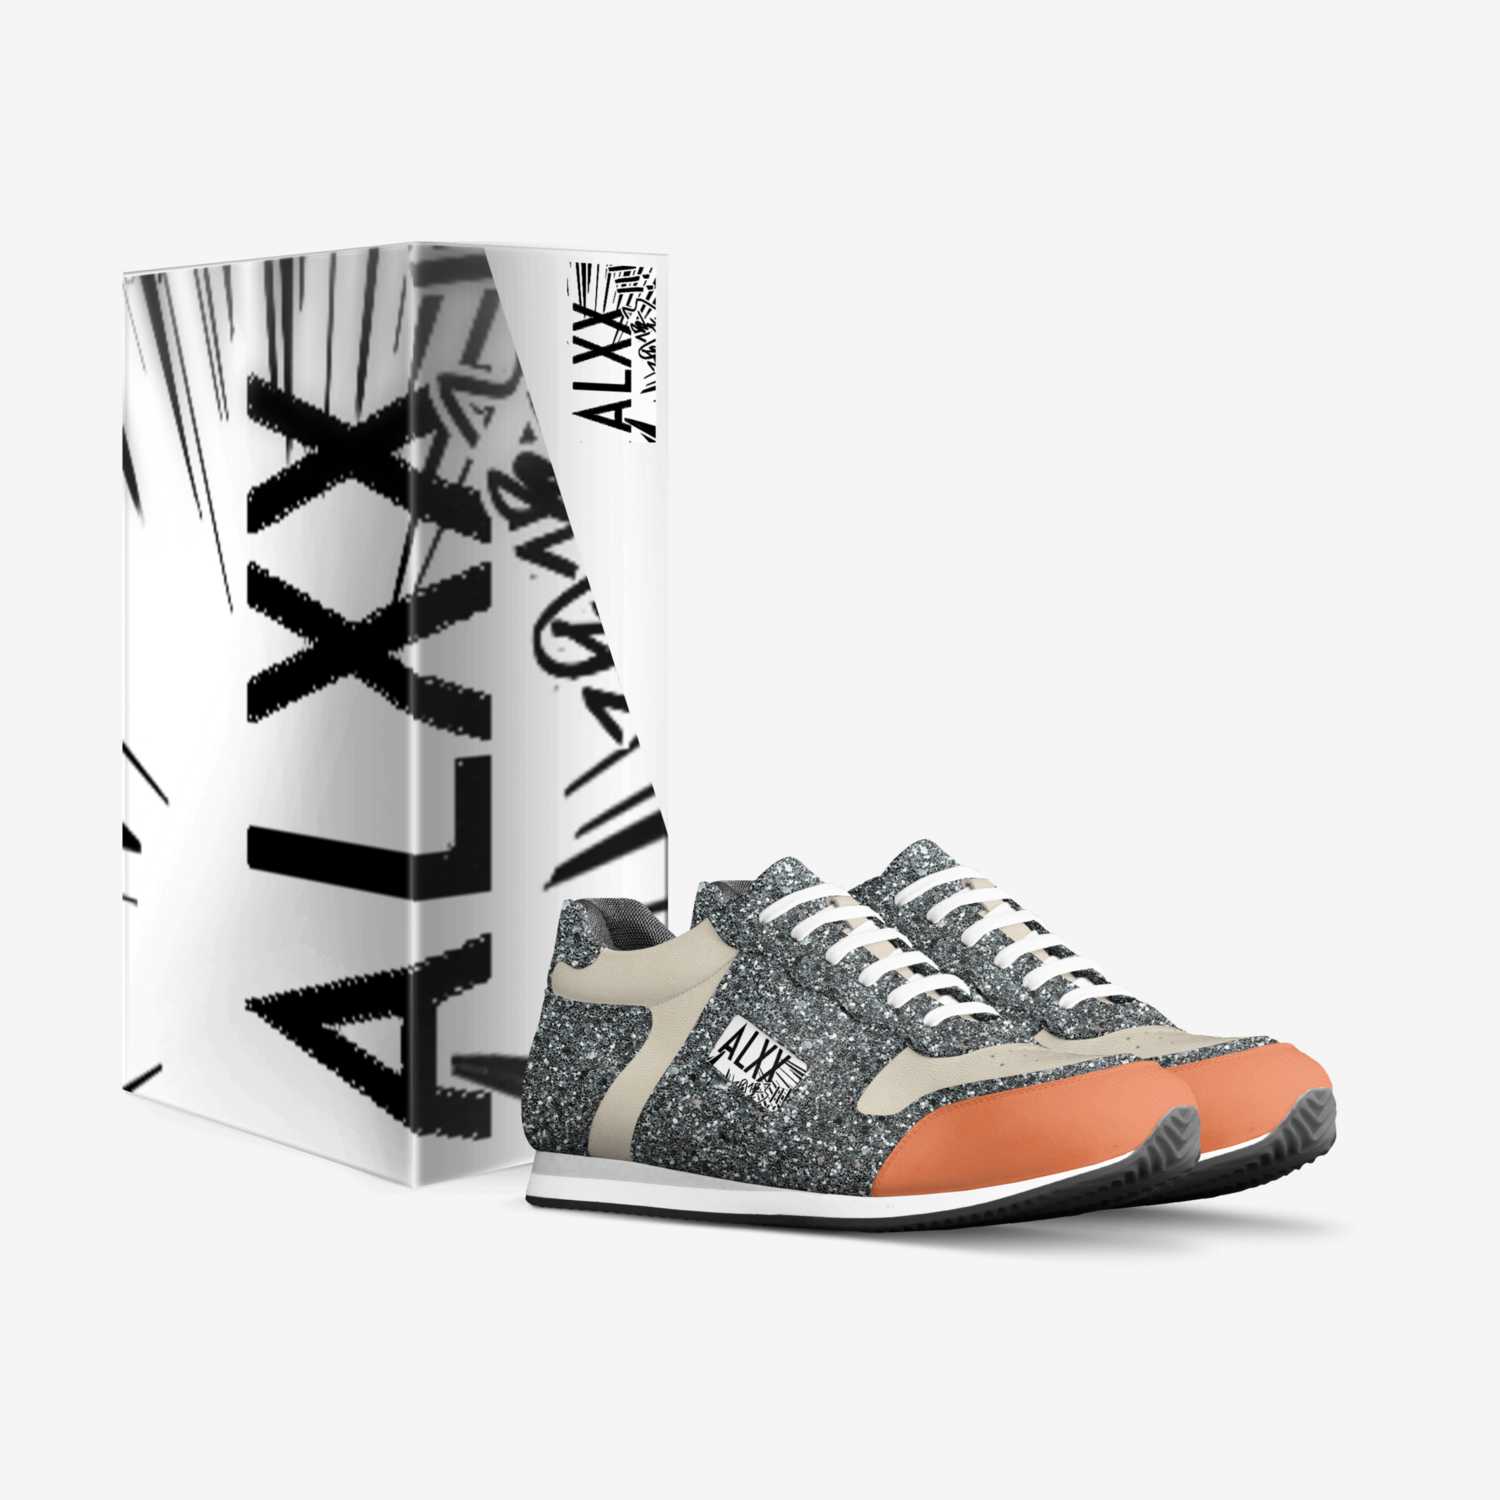 A L X X custom made in Italy shoes by Alexander Bowie | Box view